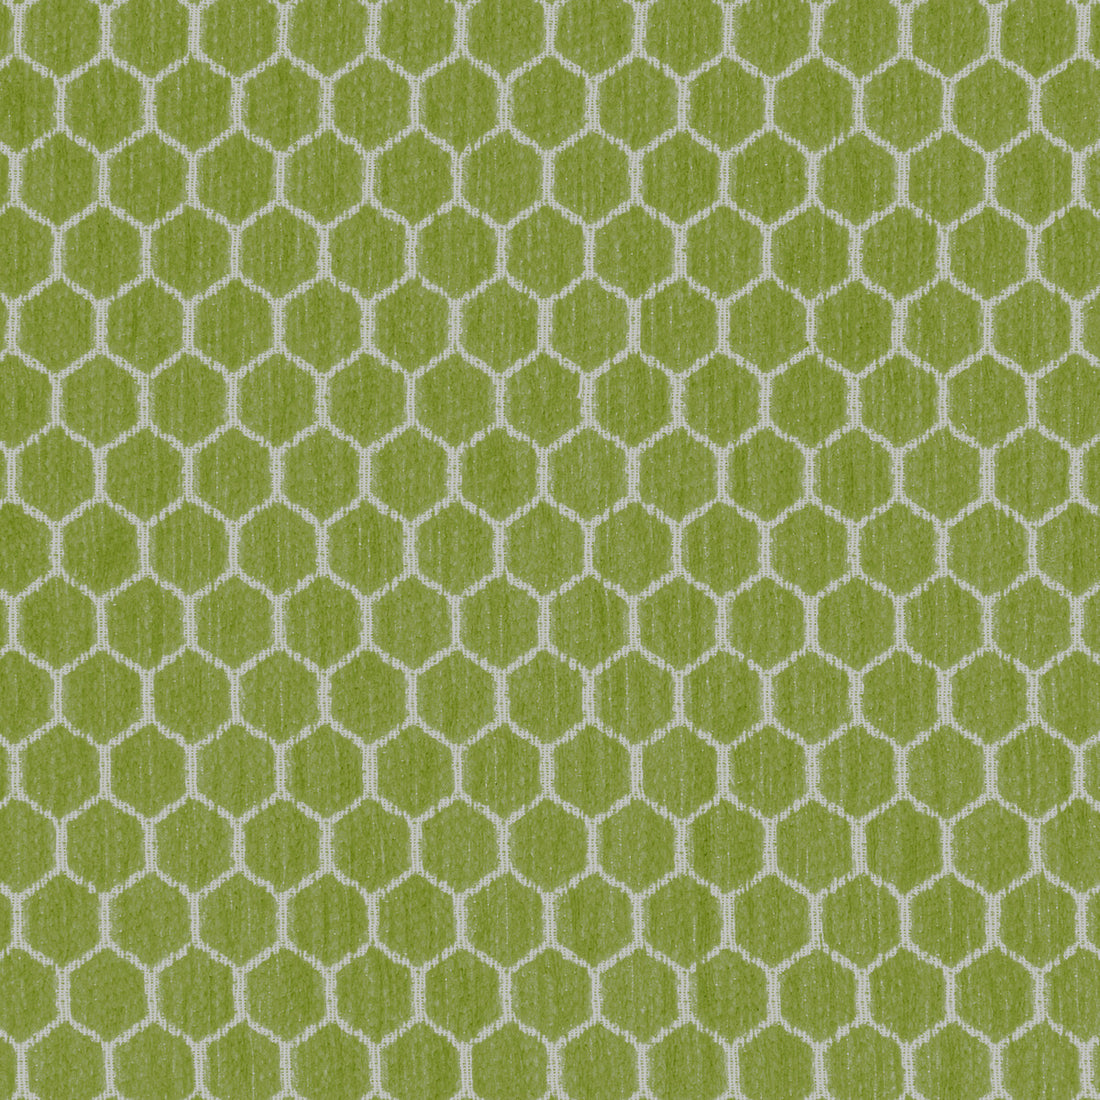 Kravet Design fabric in 36081-23 color - pattern 36081.23.0 - by Kravet Design in the Inside Out Performance Fabrics collection